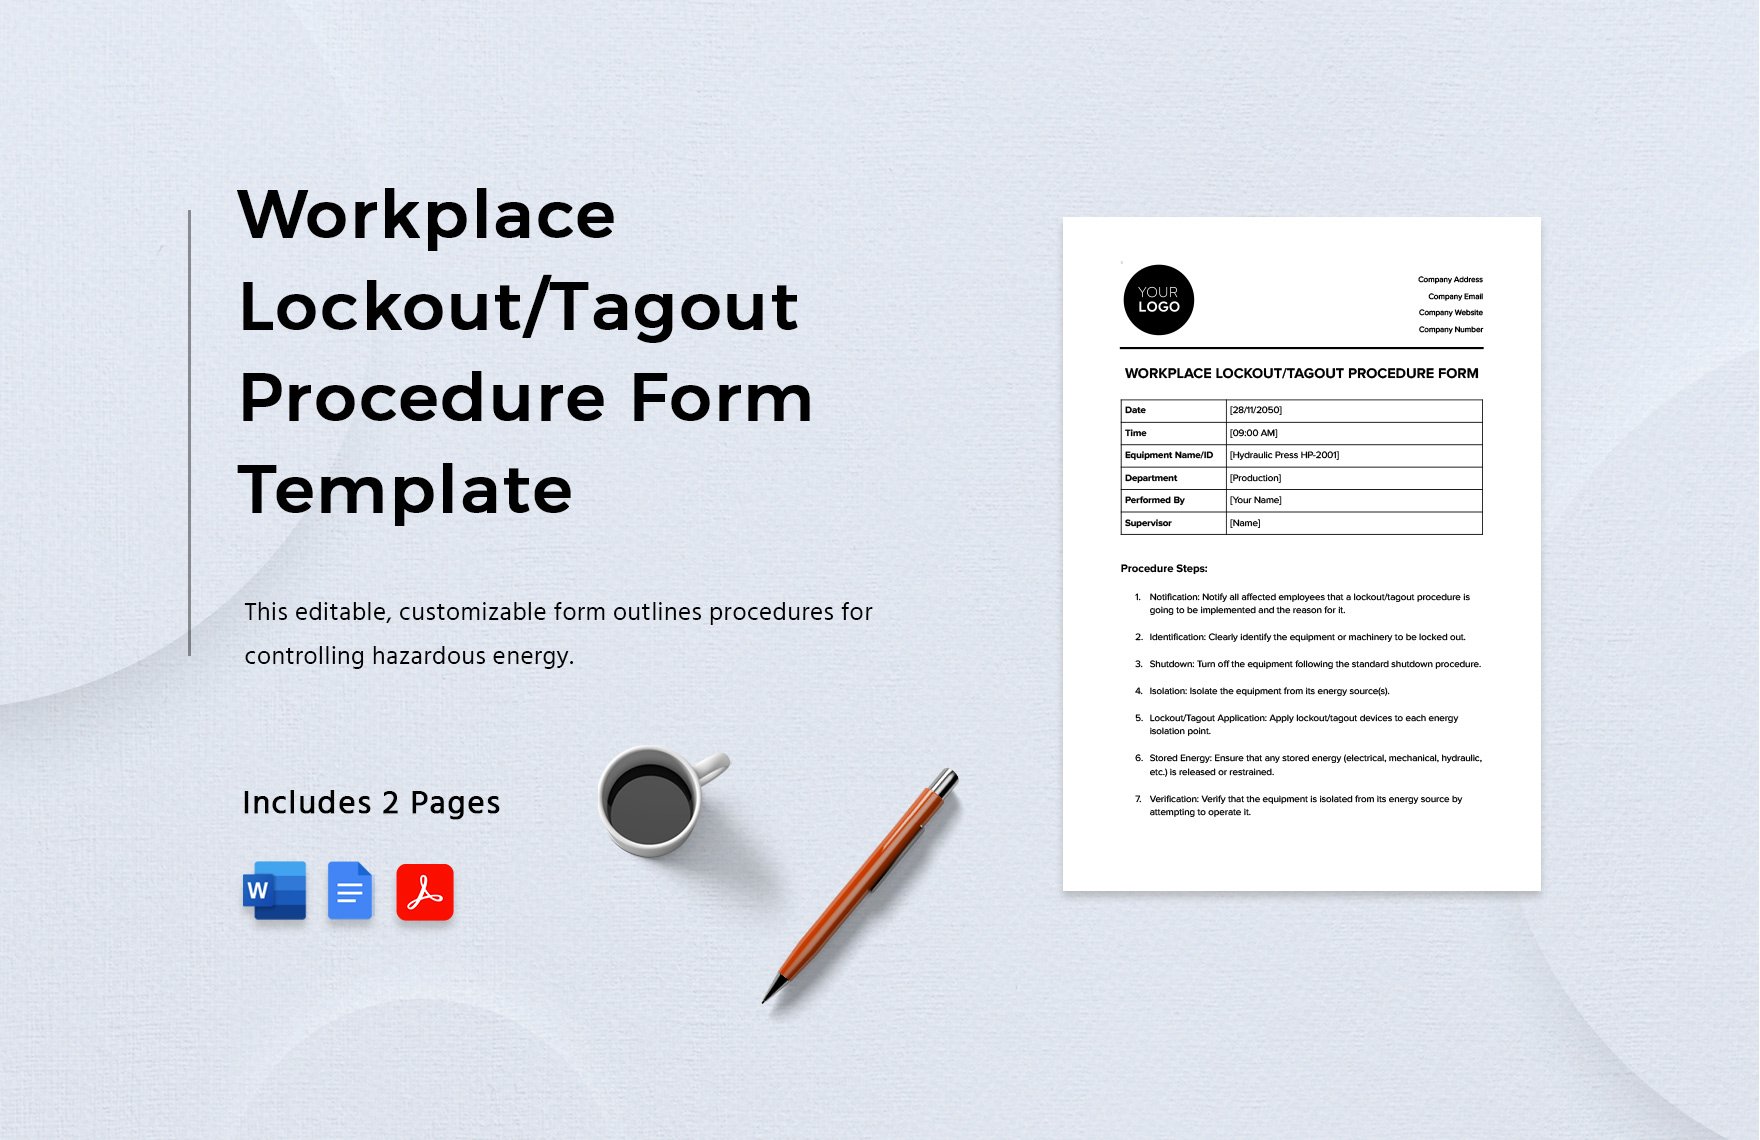 Workplace Lockout/Tagout Procedure Form Template in Word, Google Docs, PDF